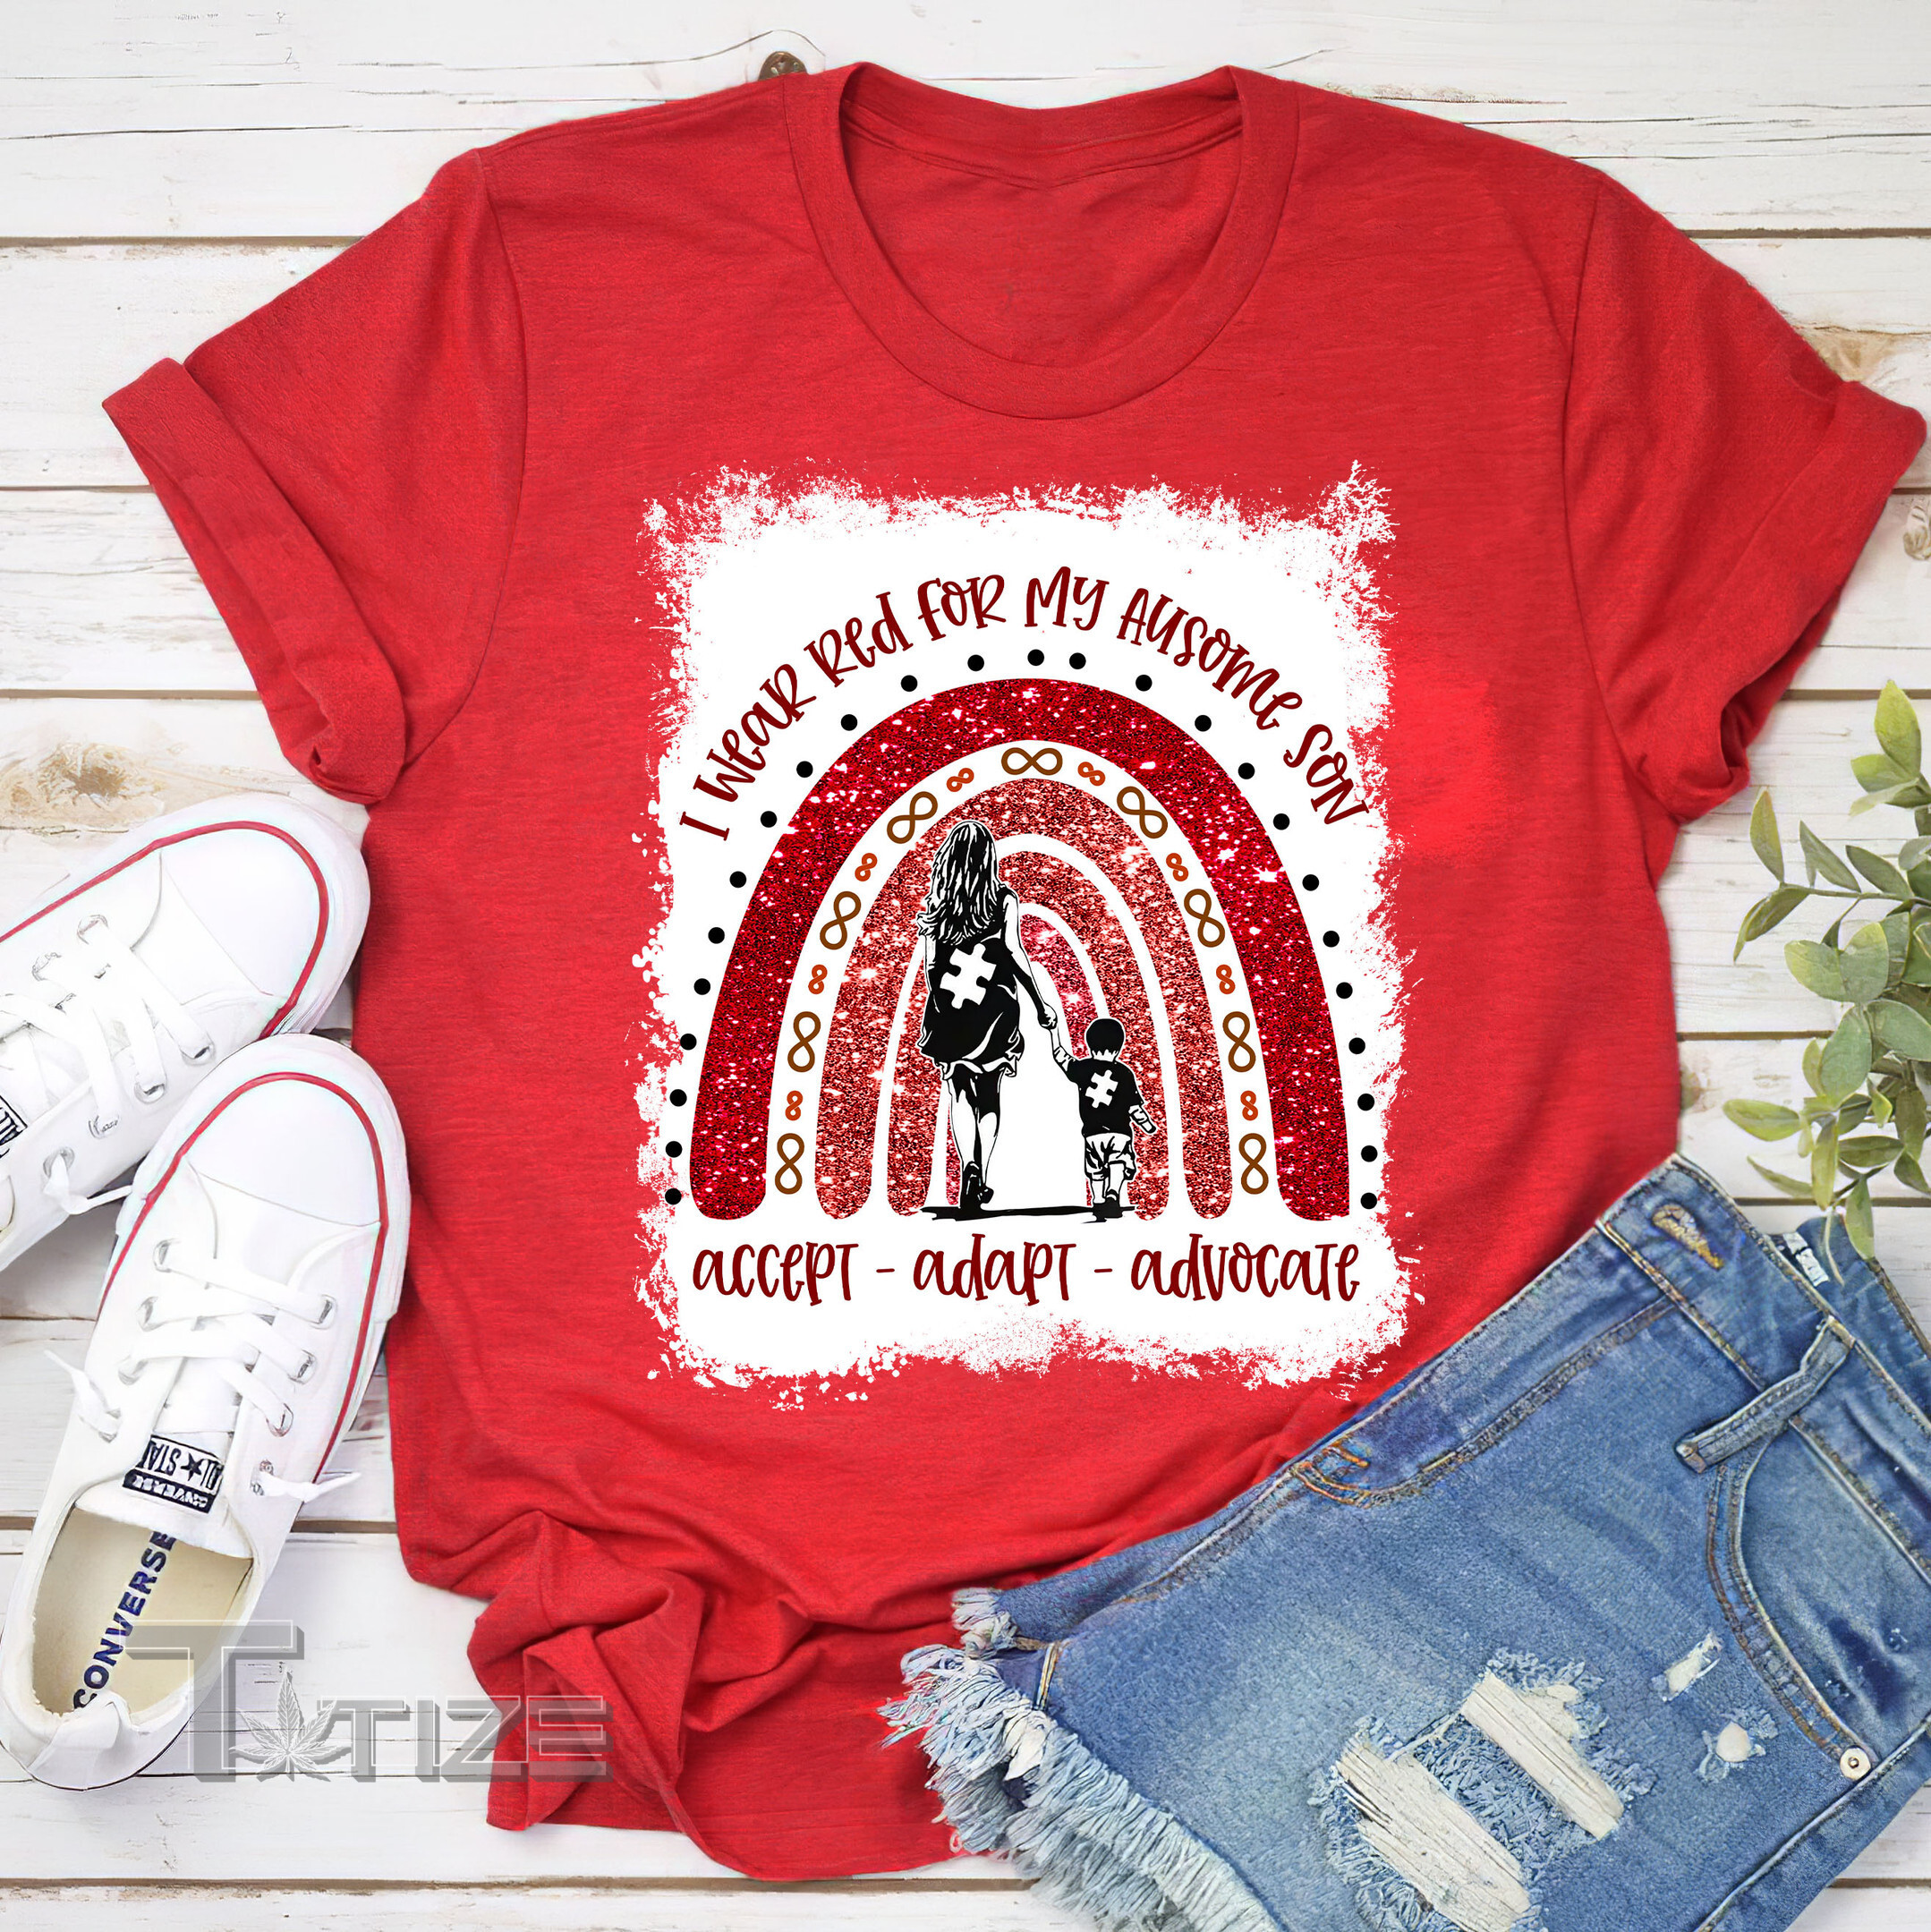 I Wear Red For My Son Graphic Unisex T Shirt, Sweatshirt, Hoodie Size S - 5XL